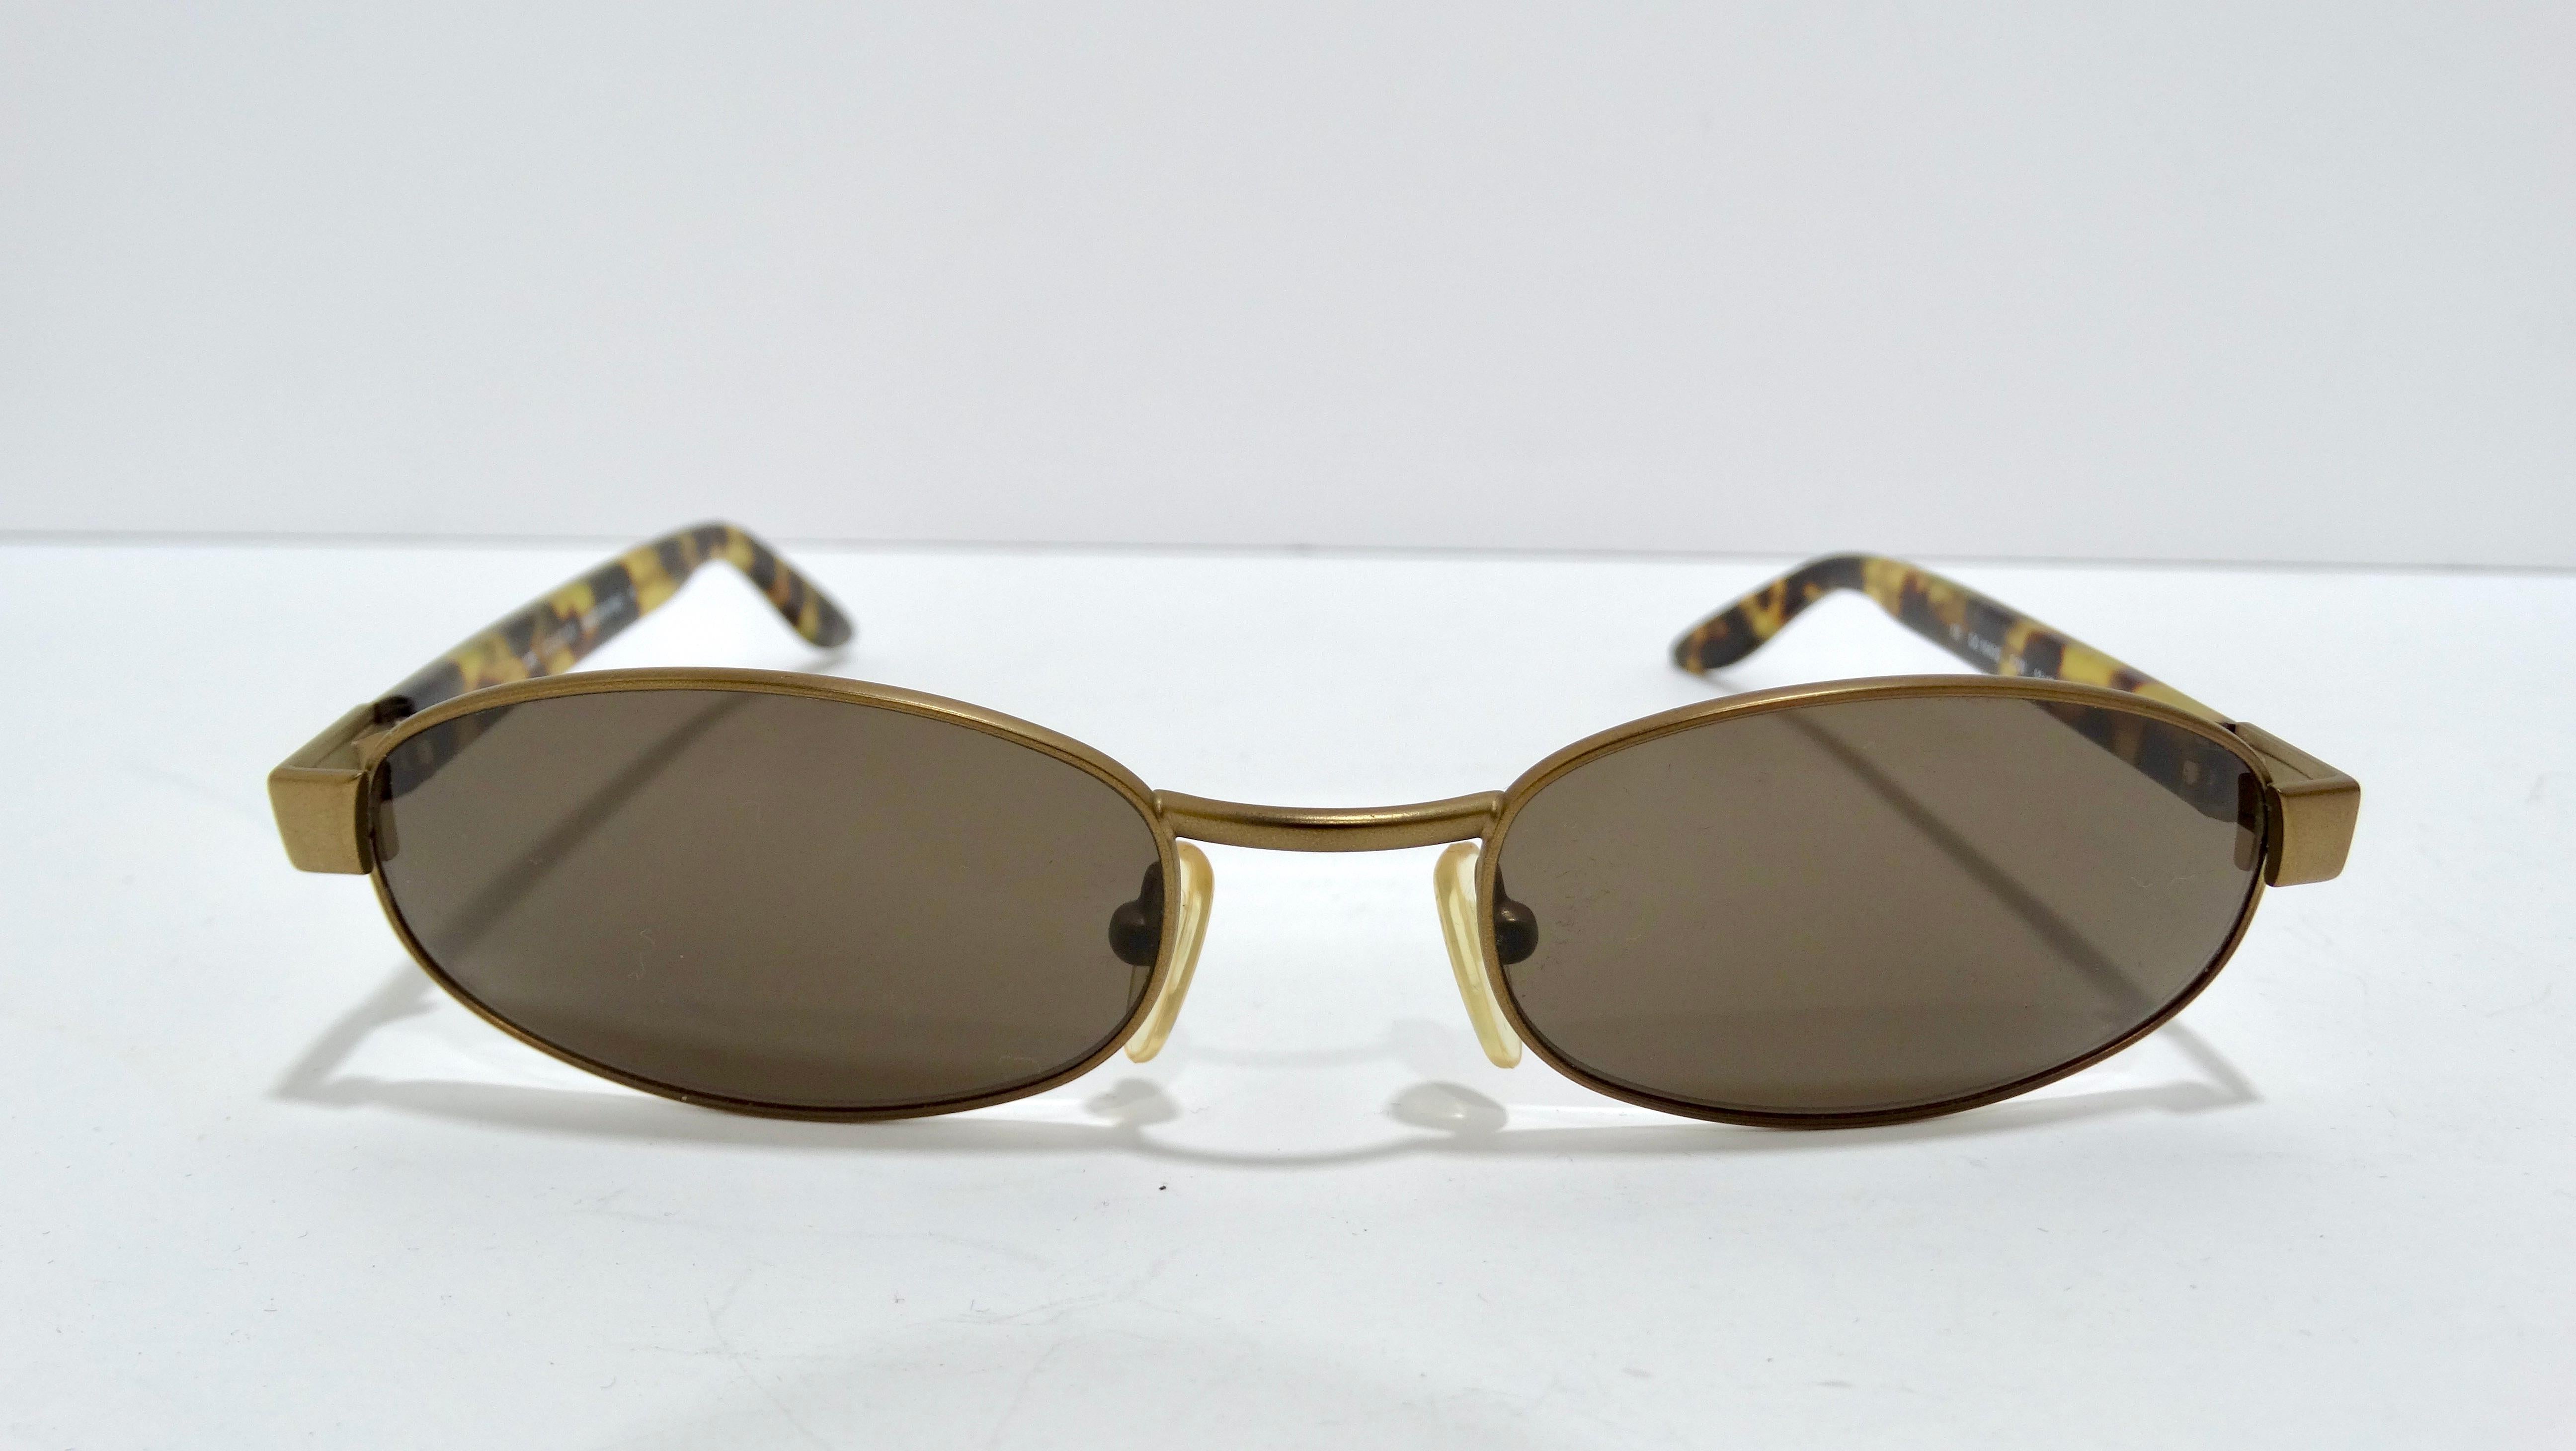 Get the perfect cool girl look. These are ultra-rare Tom Ford for Gucci sunglasses from Ford's first collection with Gucci in 1995! It doesn't get anymore special than that. They feature a chic oval shape that looks great on most any head shape and